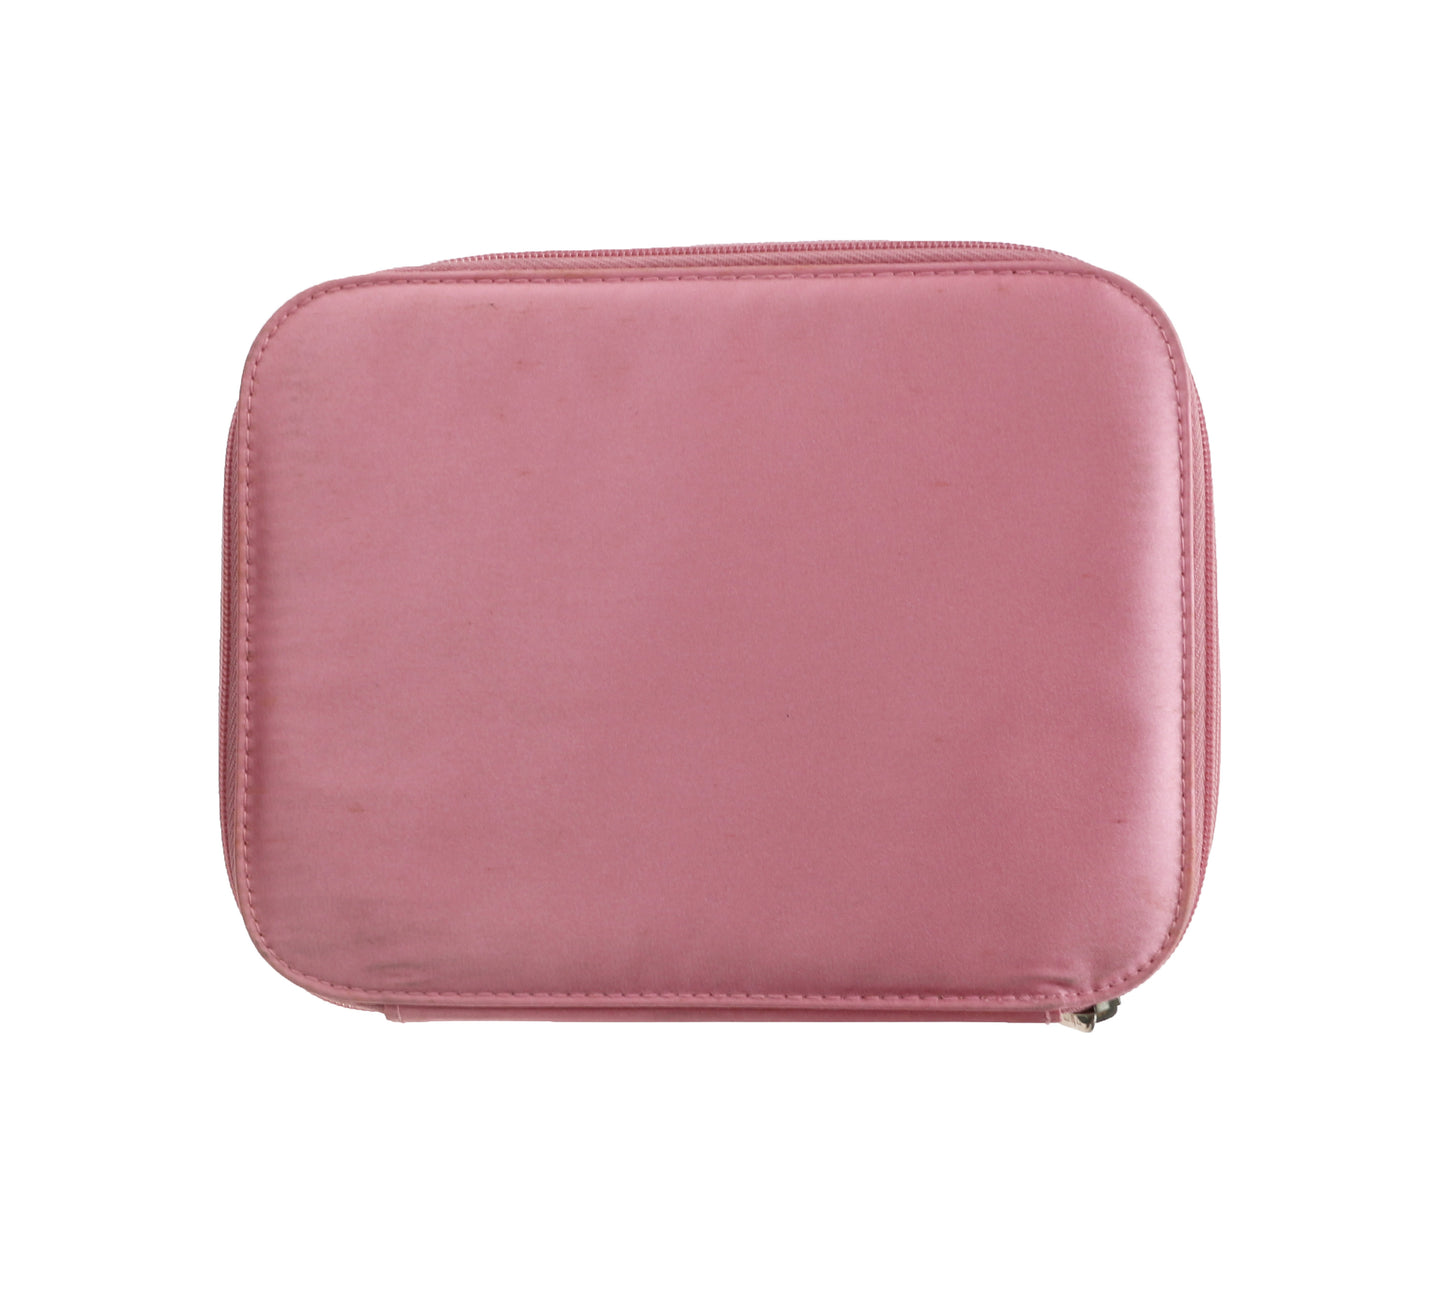 Clinique Pink Cosmetic Case Bag New (Cosmetic Wear) Cosmetic Bag